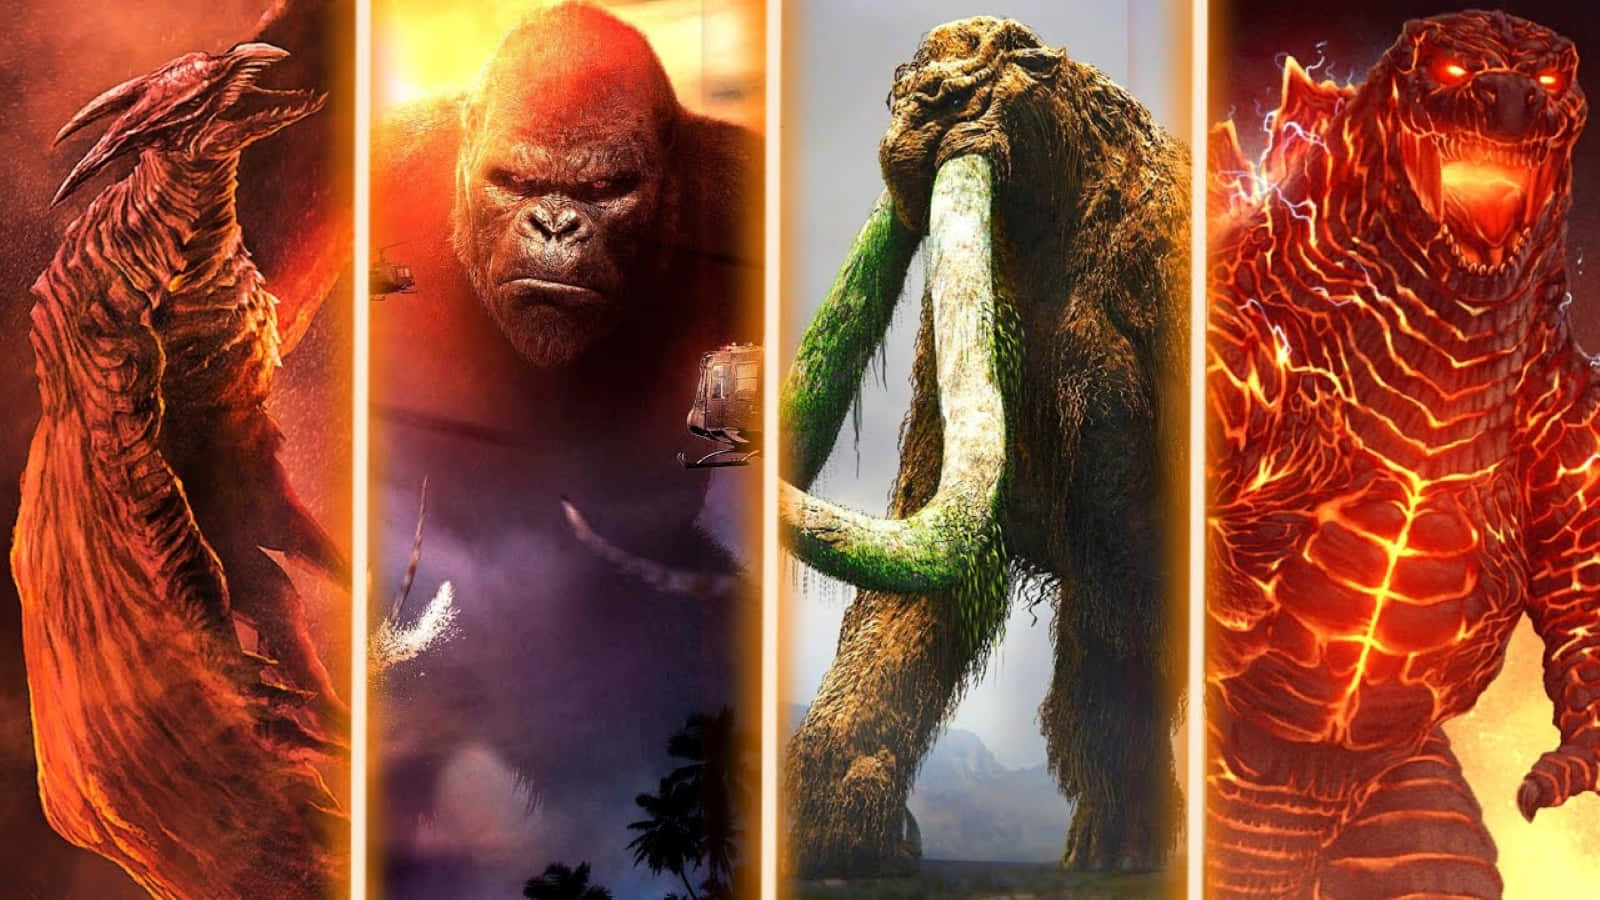 Epic battle in Monsterverse featuring Godzilla and King Kong Wallpaper